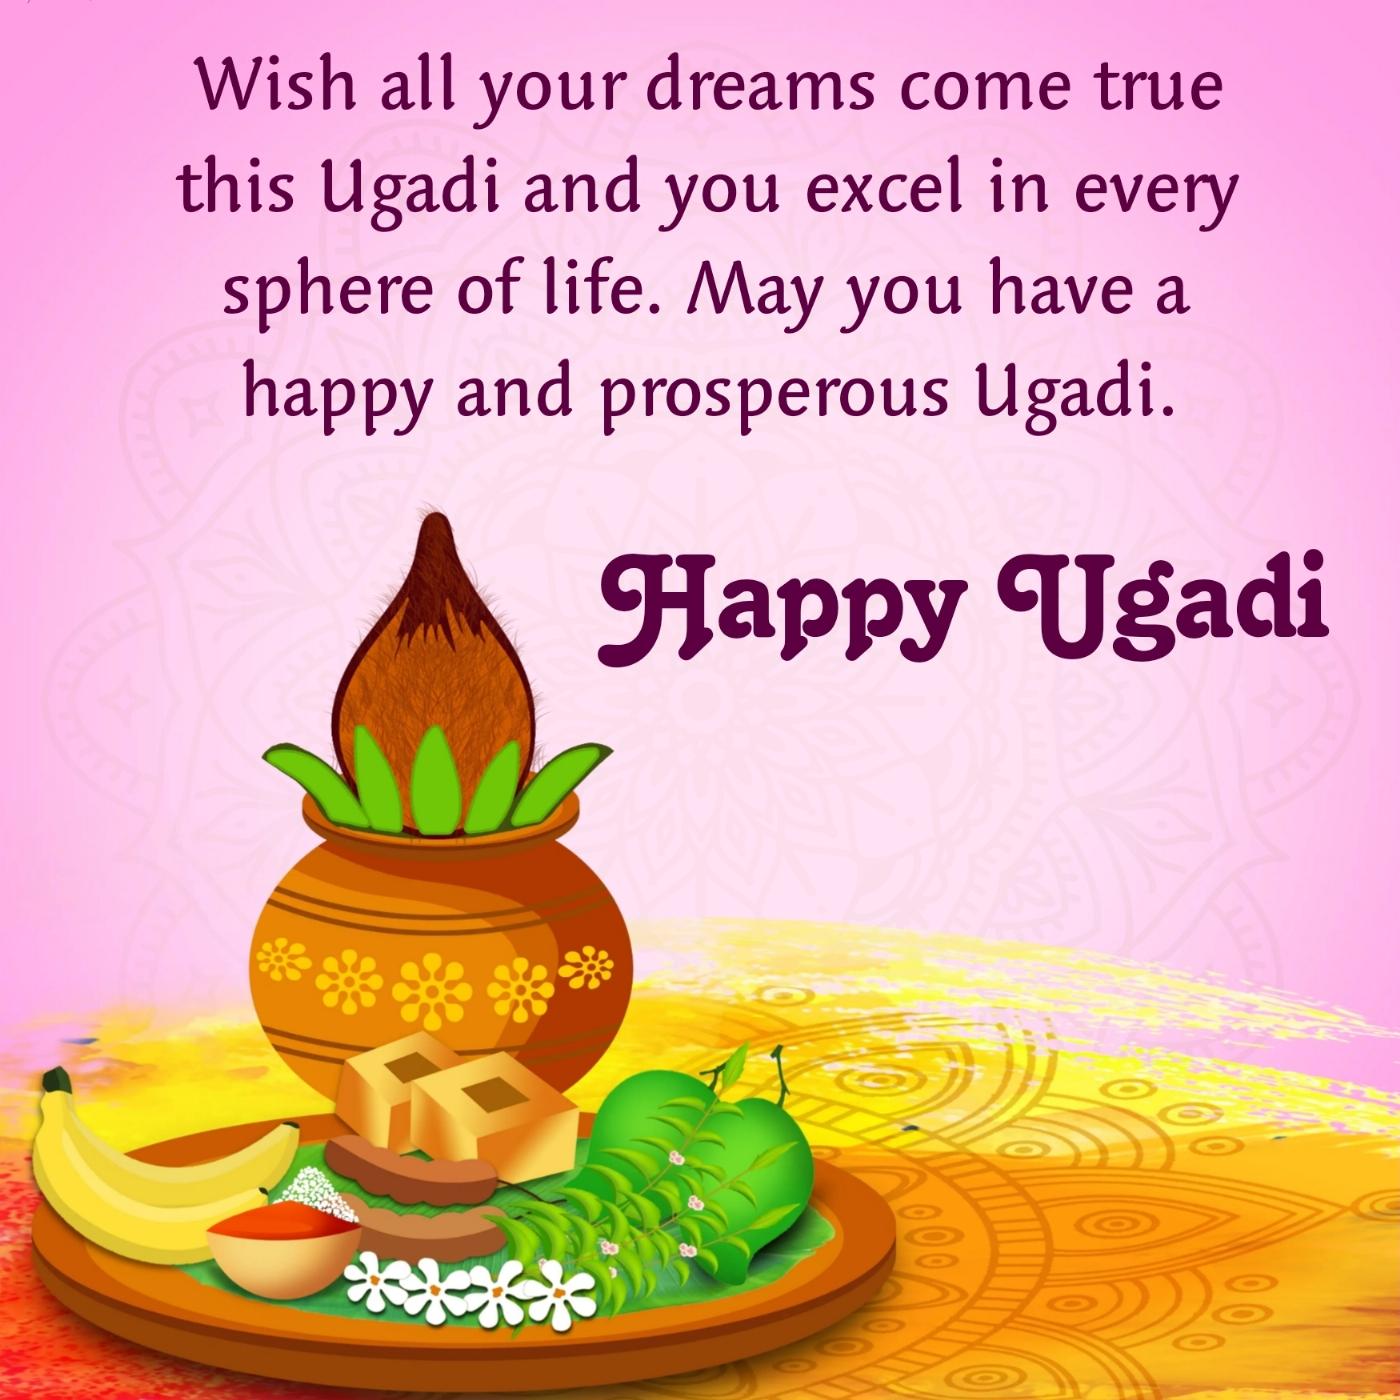 Wish all your dreams come true this Ugadi